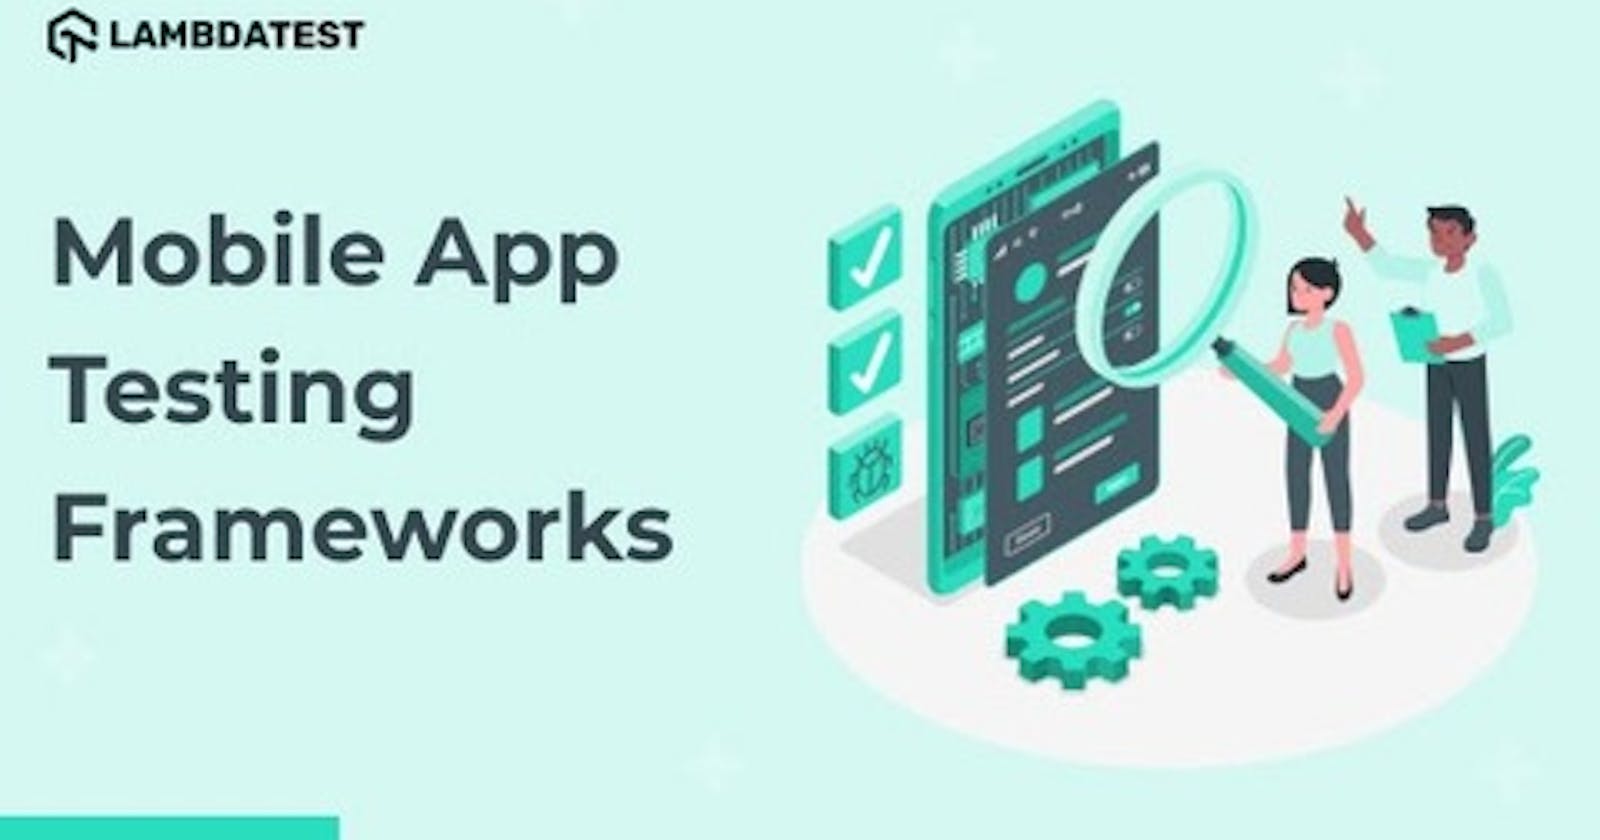 Best Mobile App Testing Framework for Android and iOS Applications